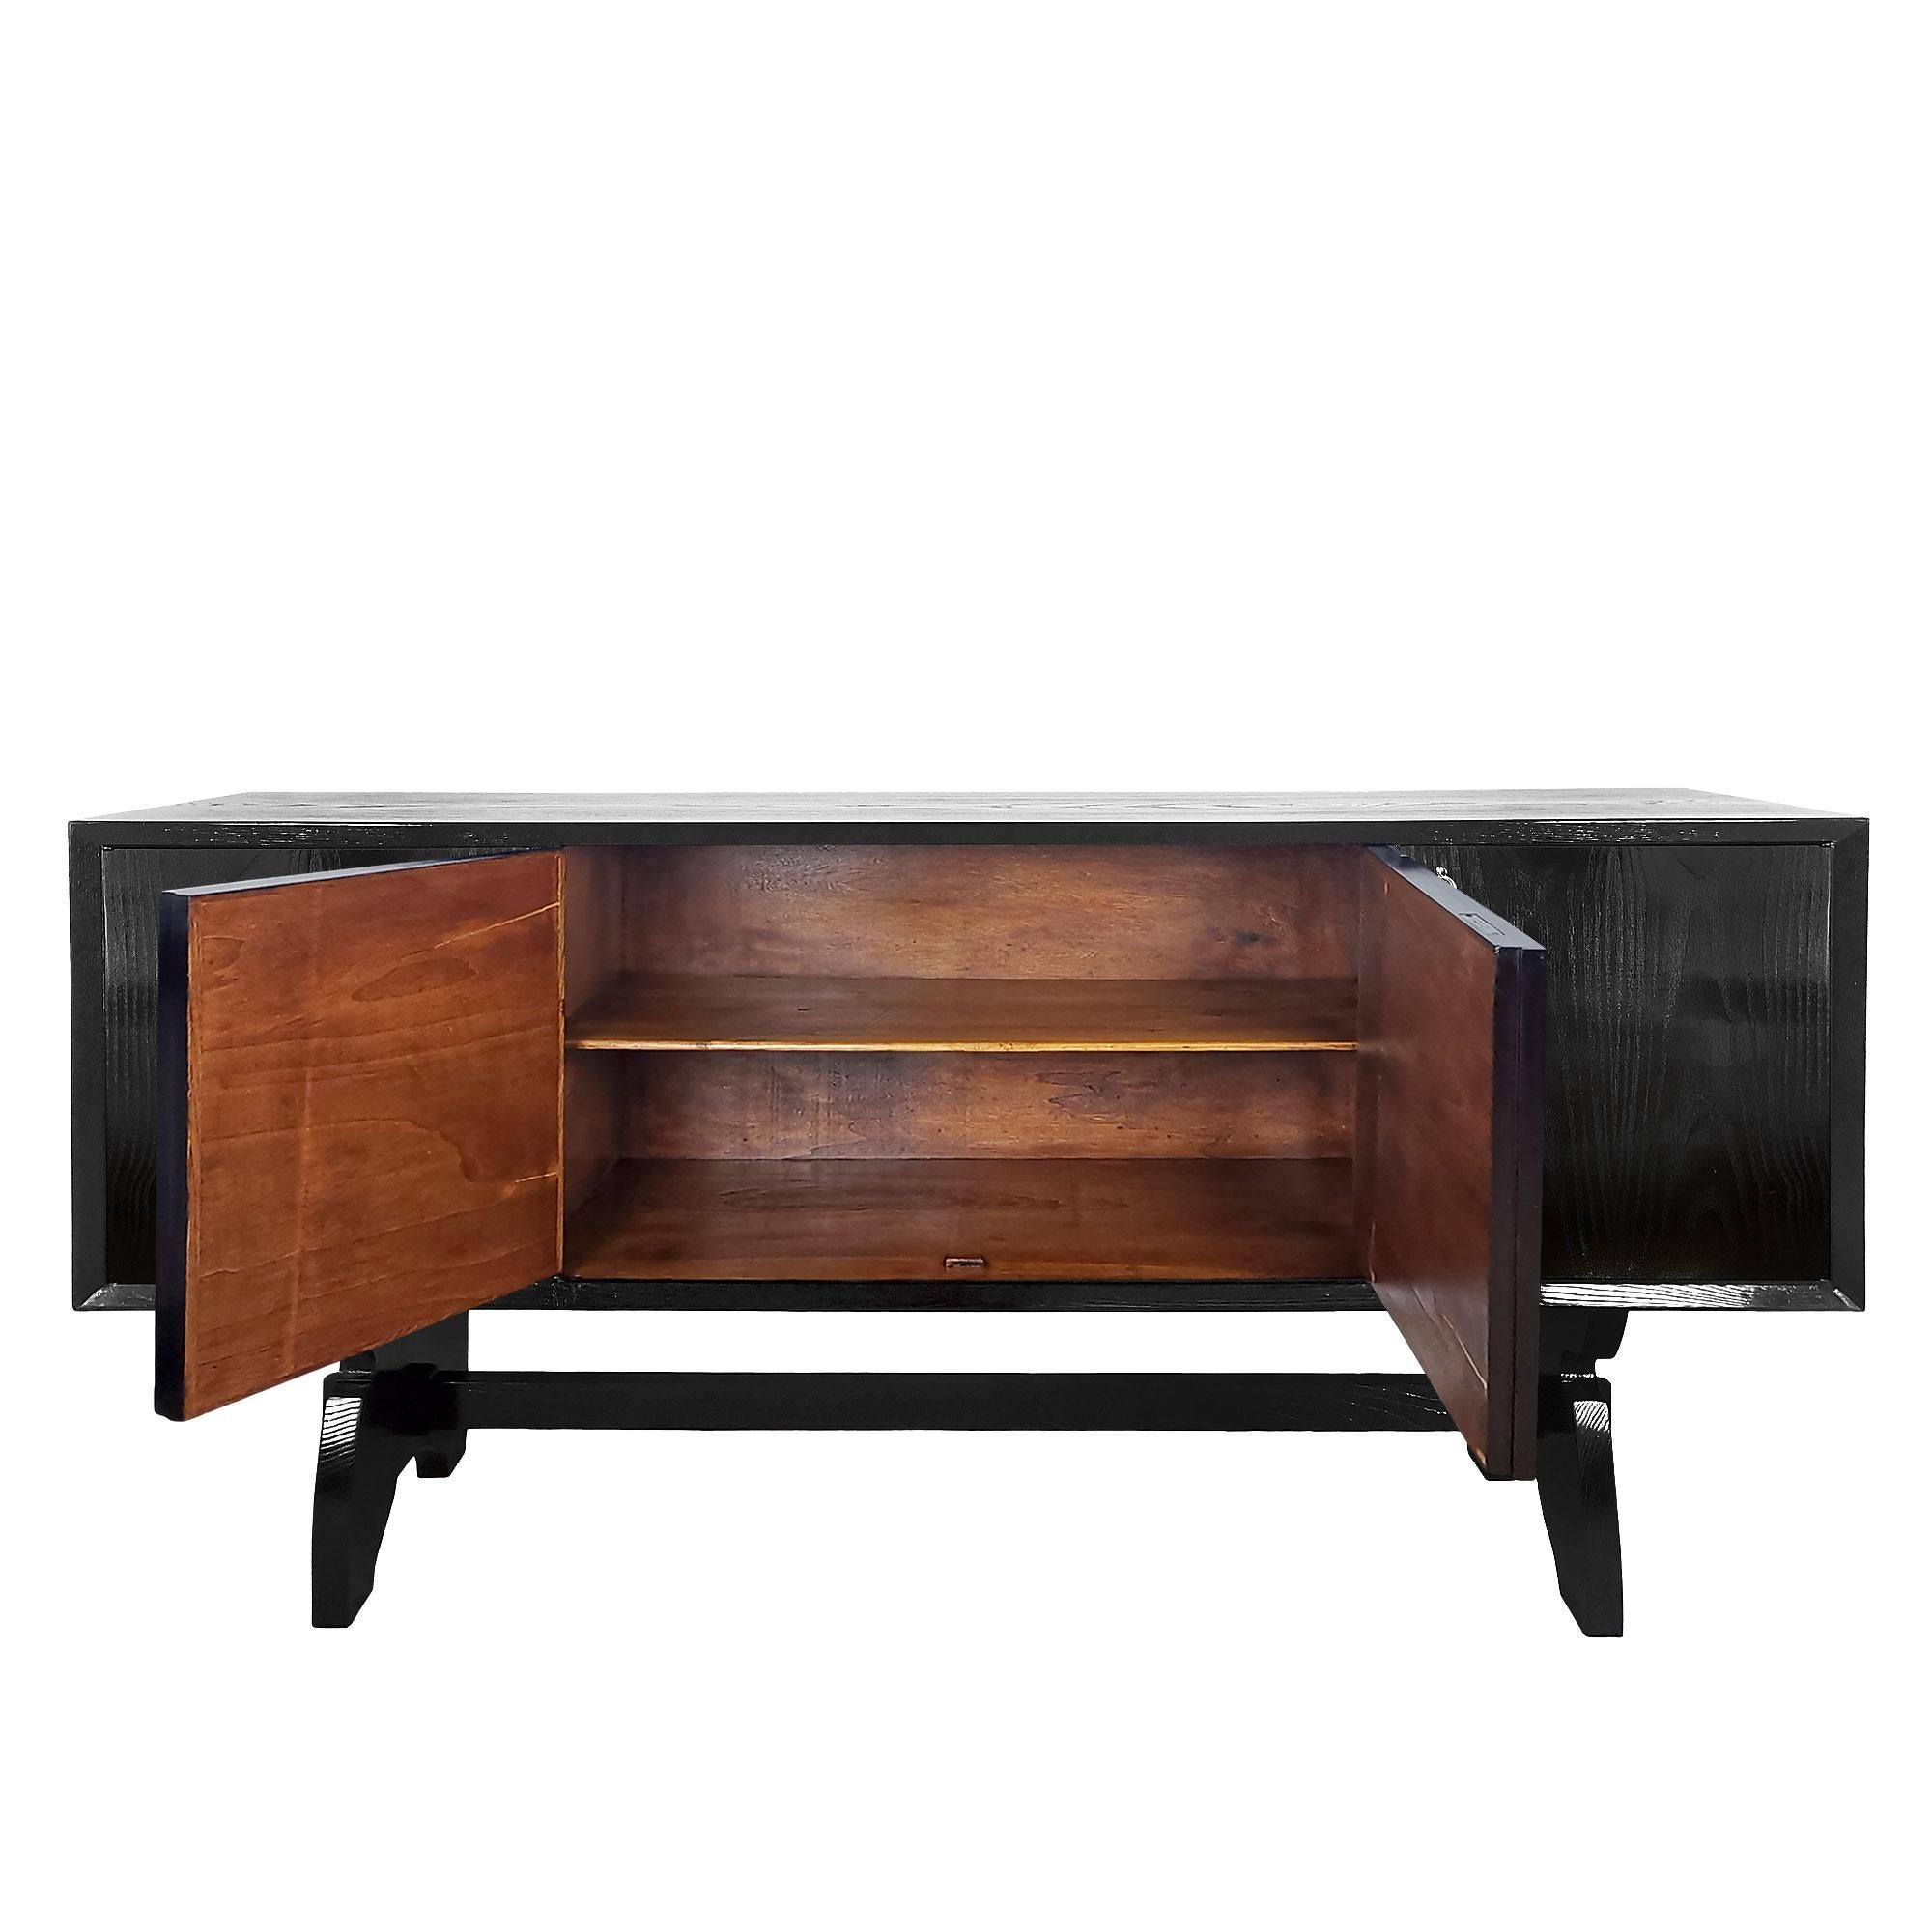 Four-door sideboard in blackened oak veneer resting on two joined struts, woodwork in central doors, walnut-stained interior, nickel-plated brass keys. “Open pore” shellac finish.

Attributed to Paolo Buffa,

Italy c. 1940.